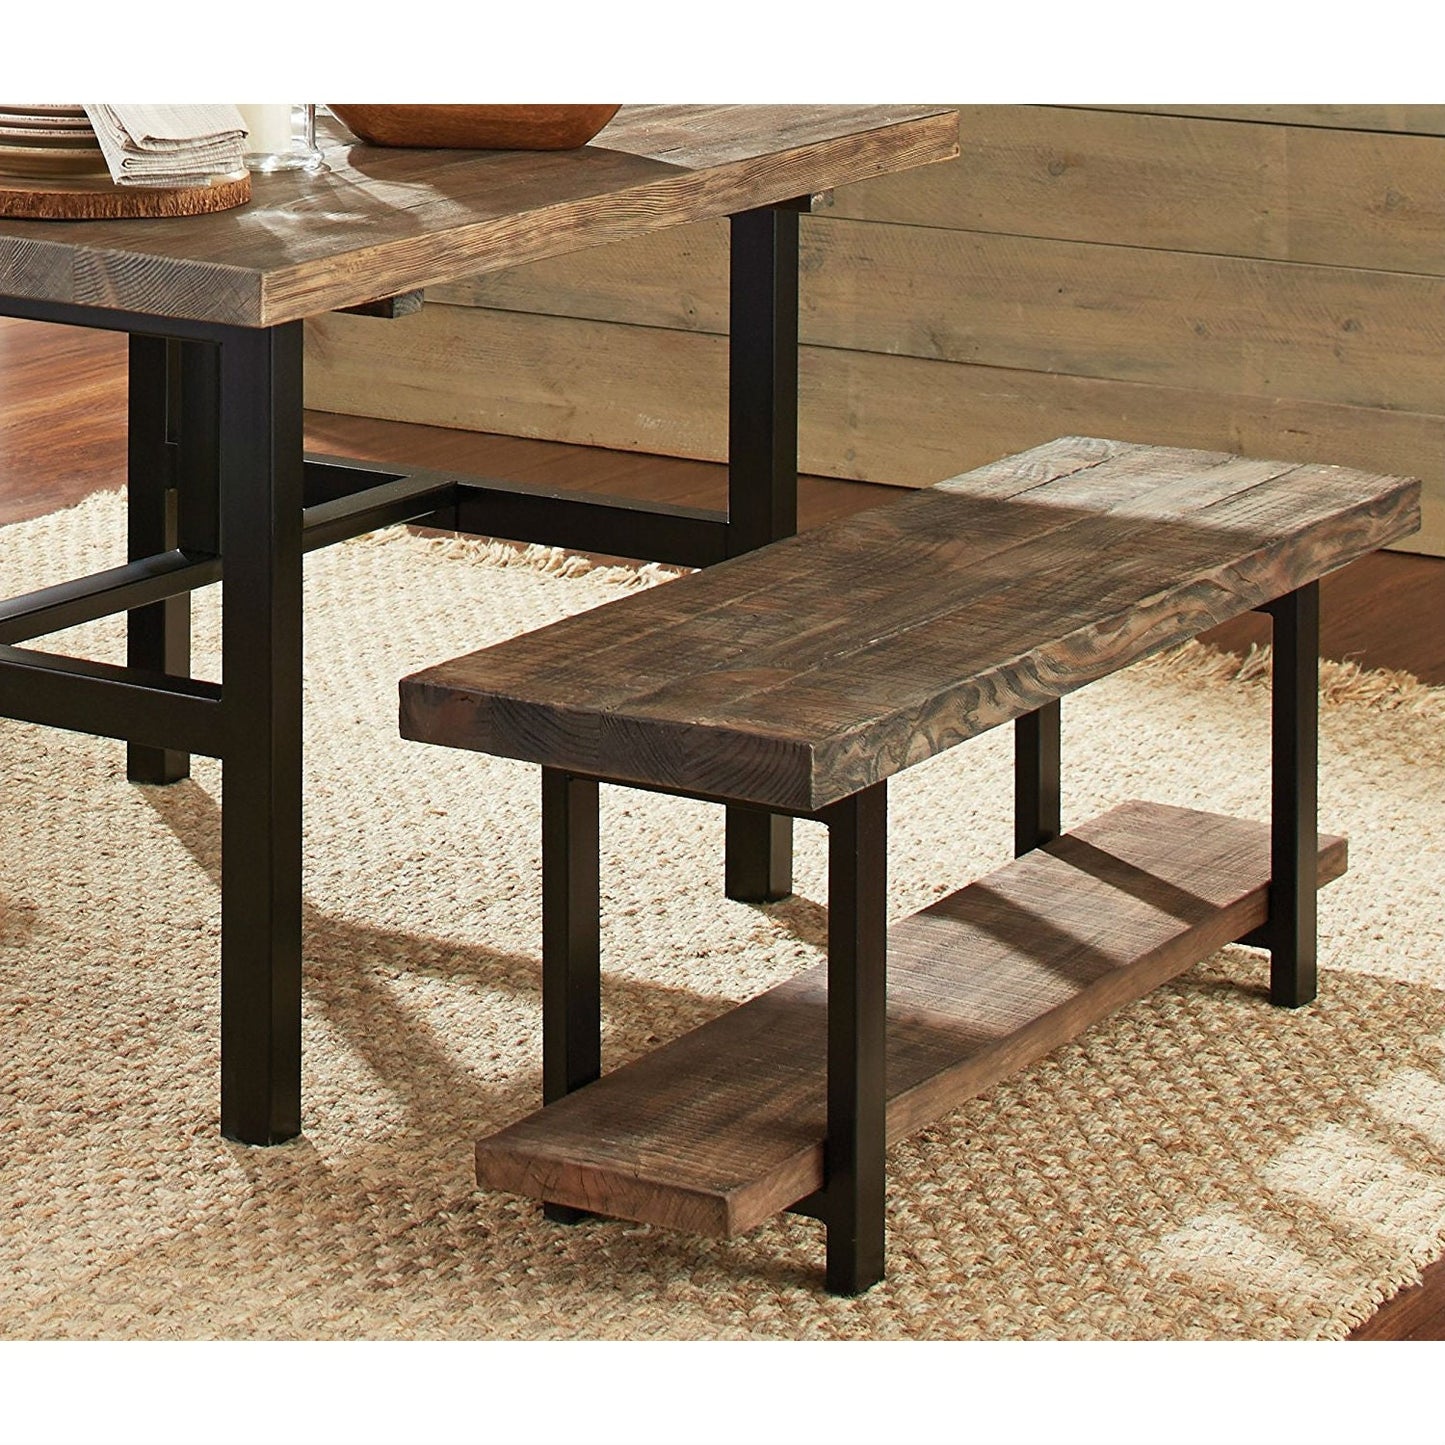 Accents > Benches - Modern Industrial Style Wood And Metal Accent Bench